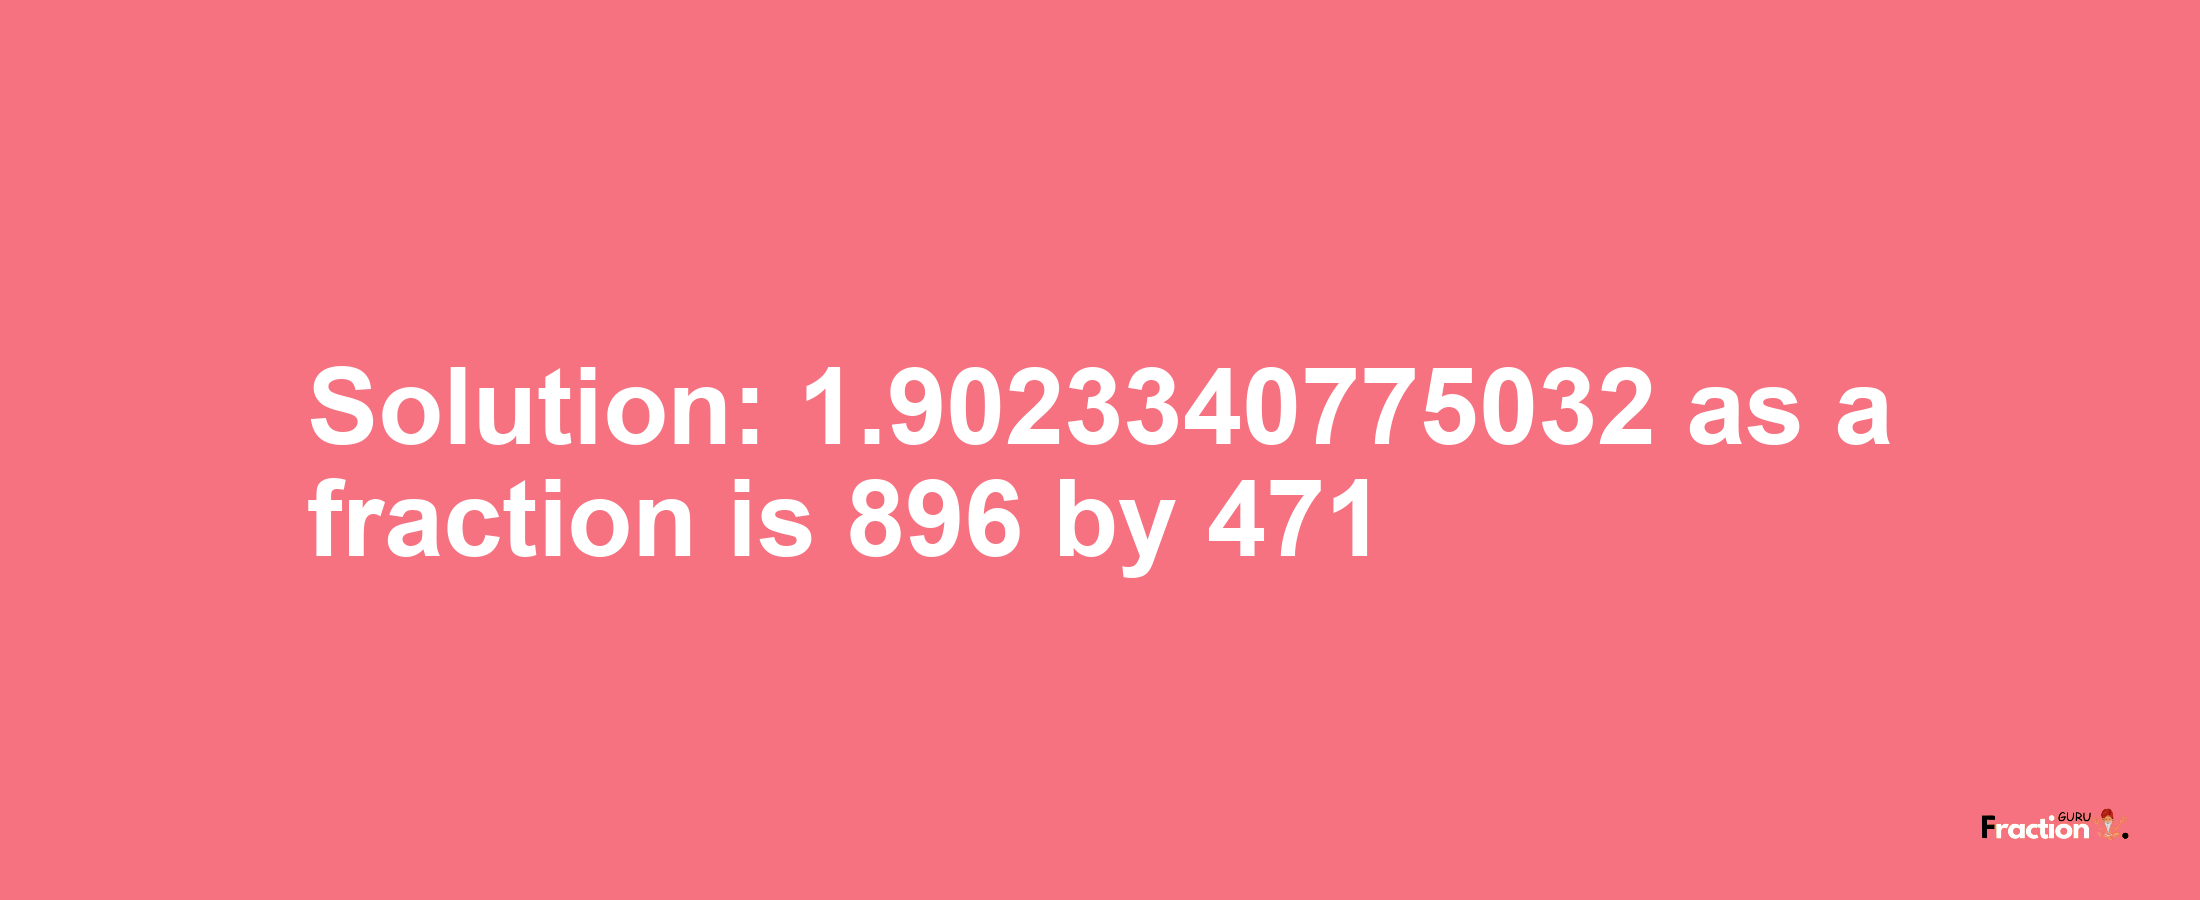 Solution:1.9023340775032 as a fraction is 896/471